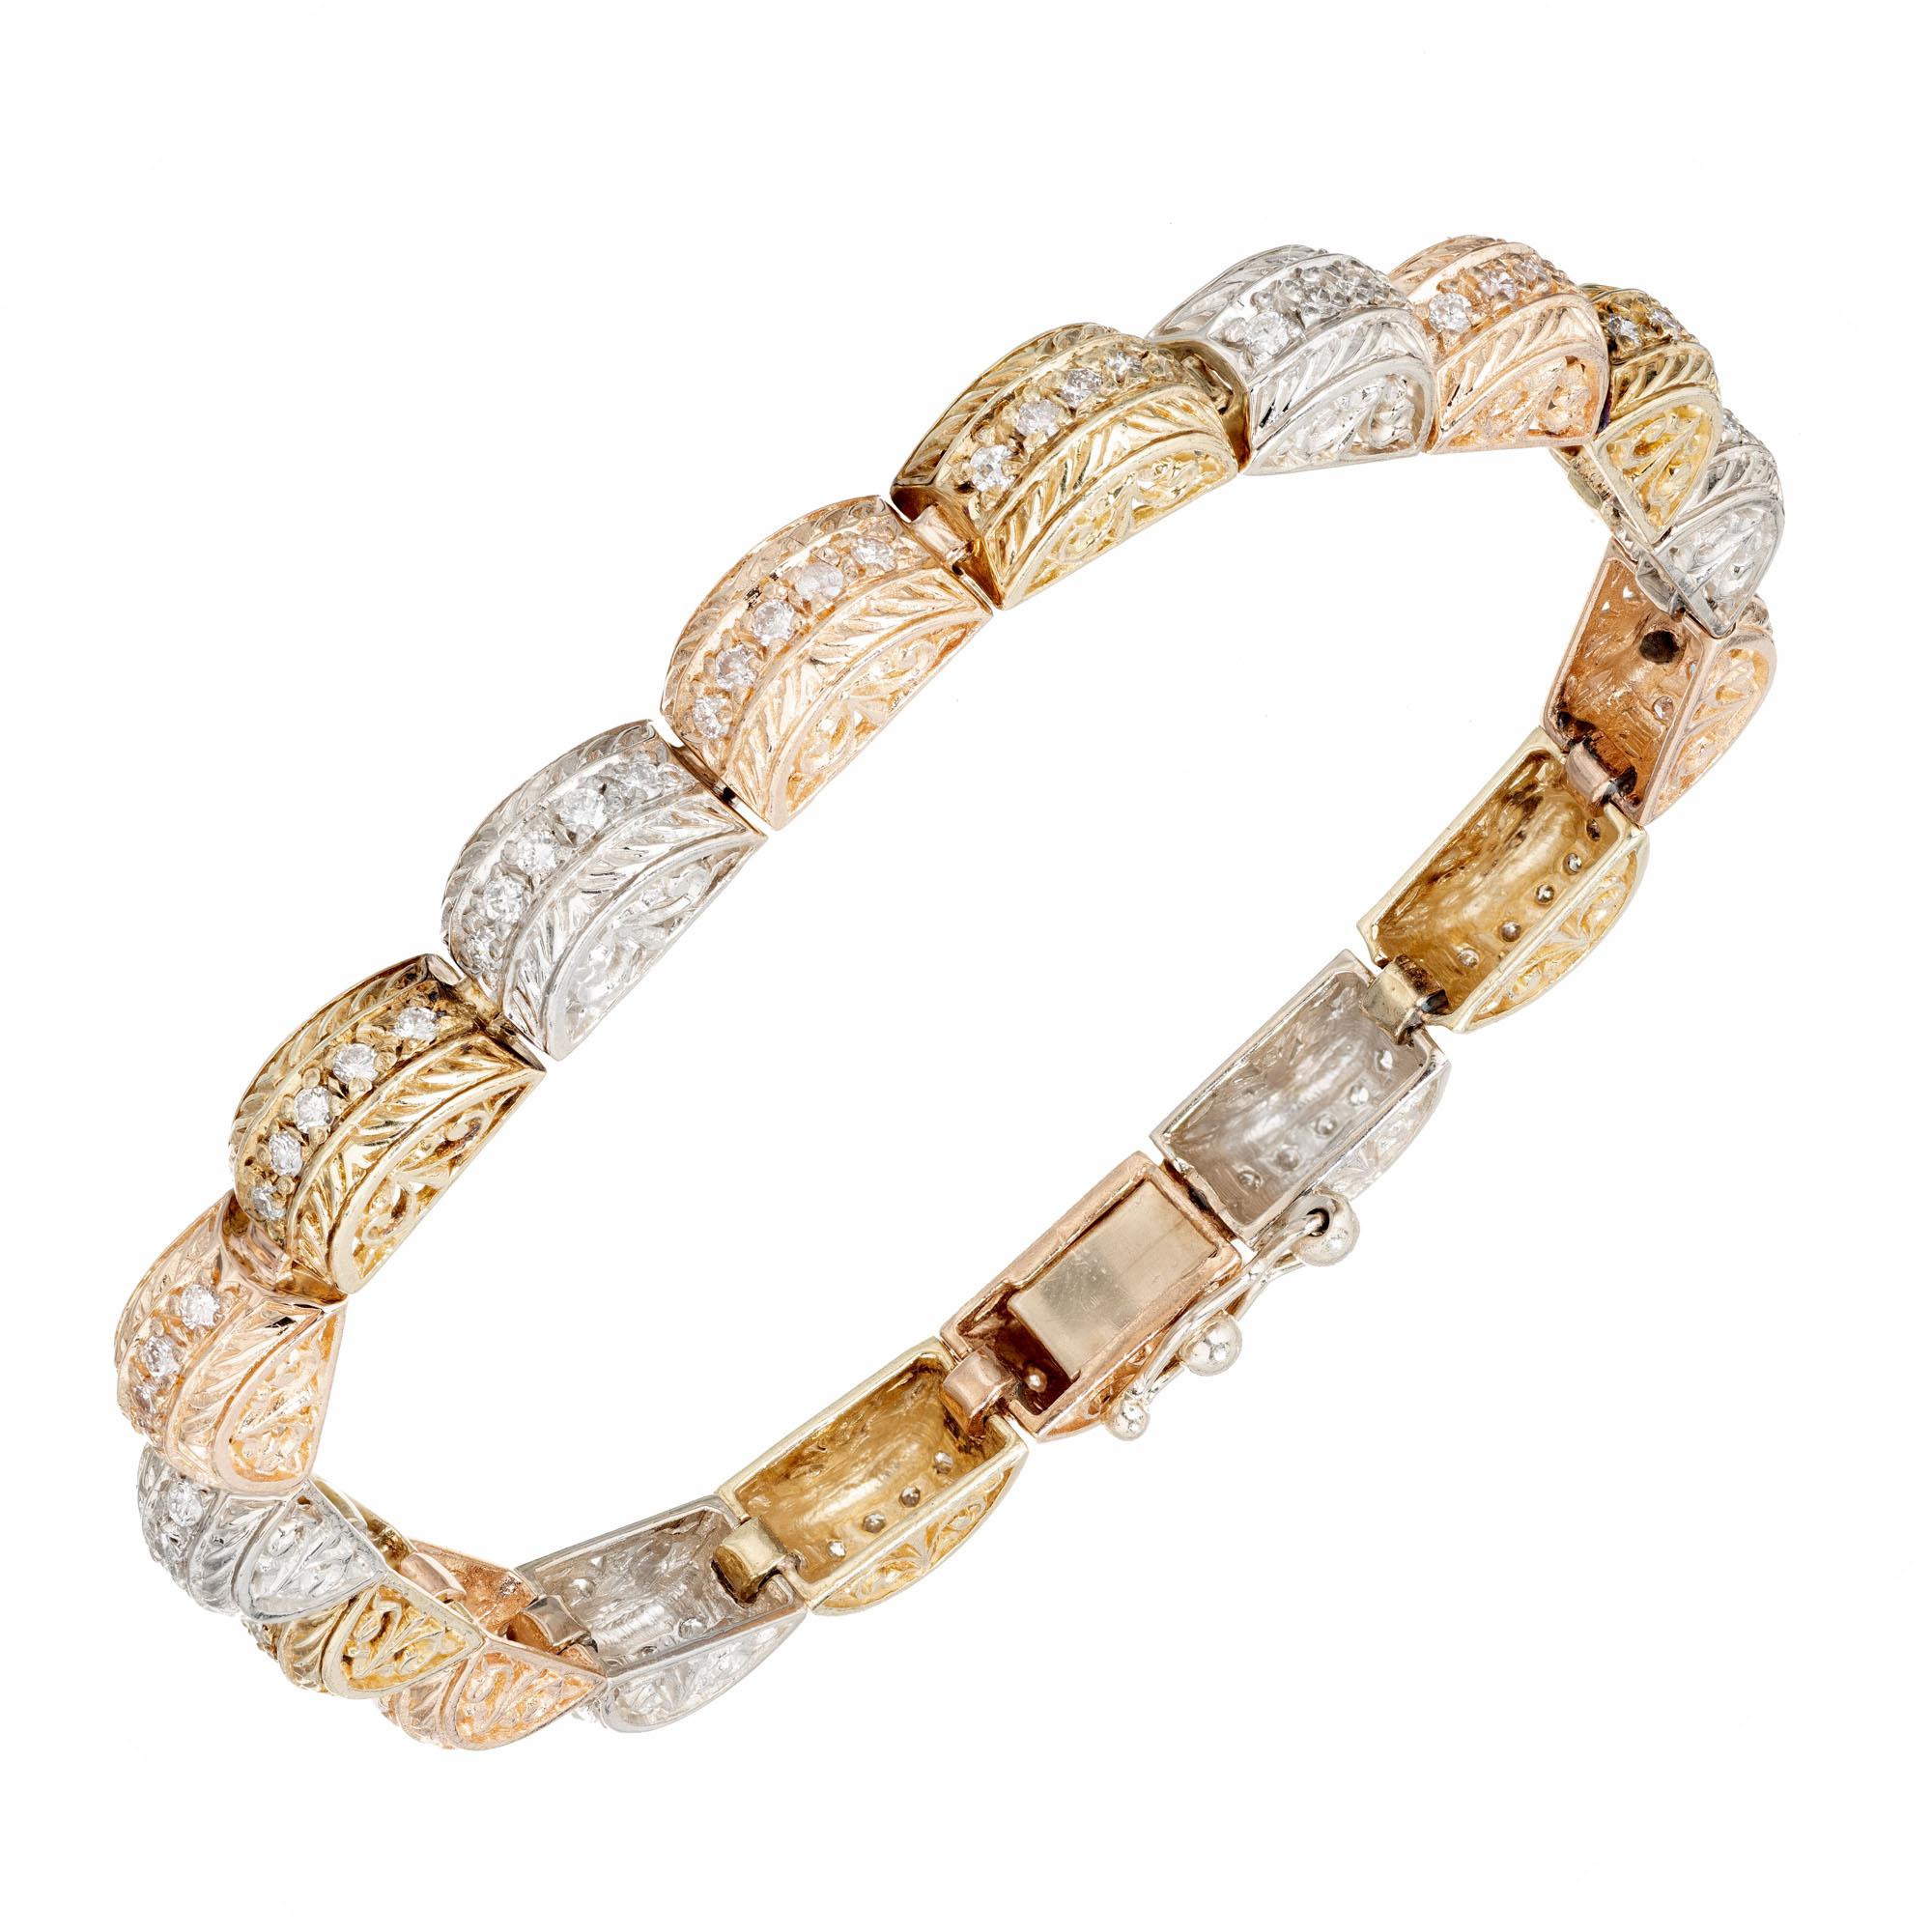 Hinged domed link bracelet with pierced sides and engraved tops. Tri-color 14k yellow, Rose and white gold. 

89 full cut diamonds, approx. total weight 1.15cts, F, VS2 to SI1 
Length: 7 inches 
Width: 5.46mm 
Height: 5.2mm 
Hand engraved and bead